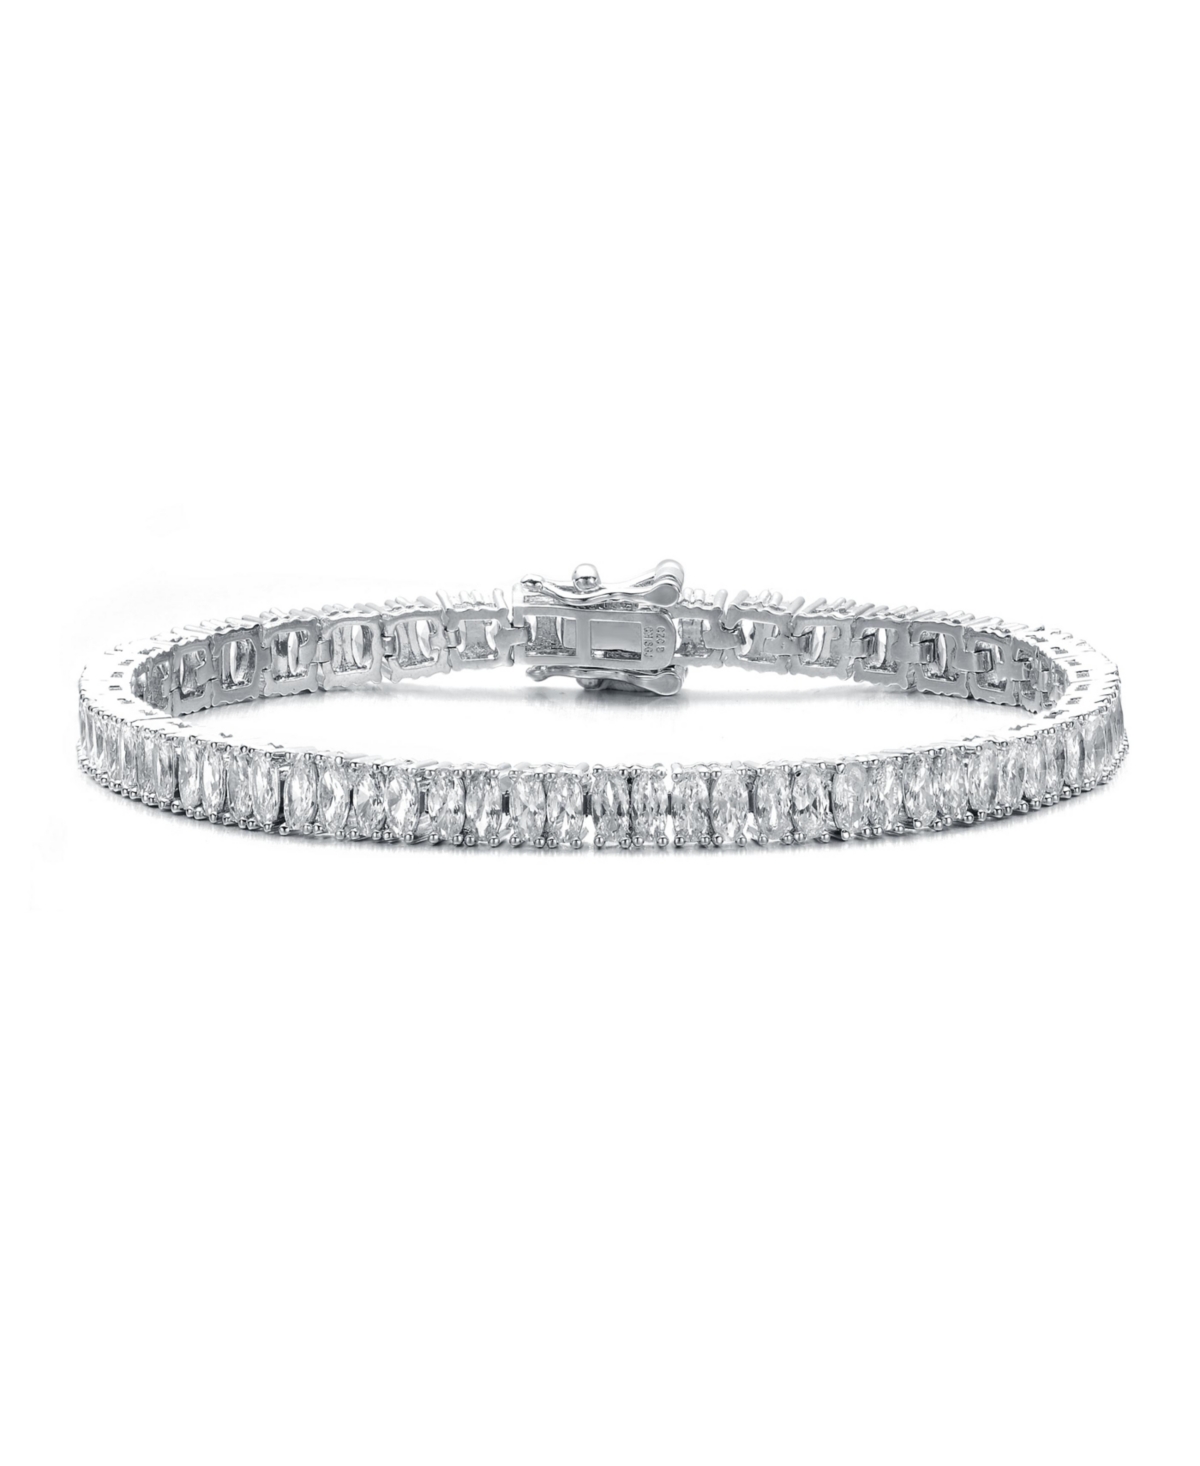 White Gold Plated with Clear Cubic Zirconias Tennis Bracelet - Silver